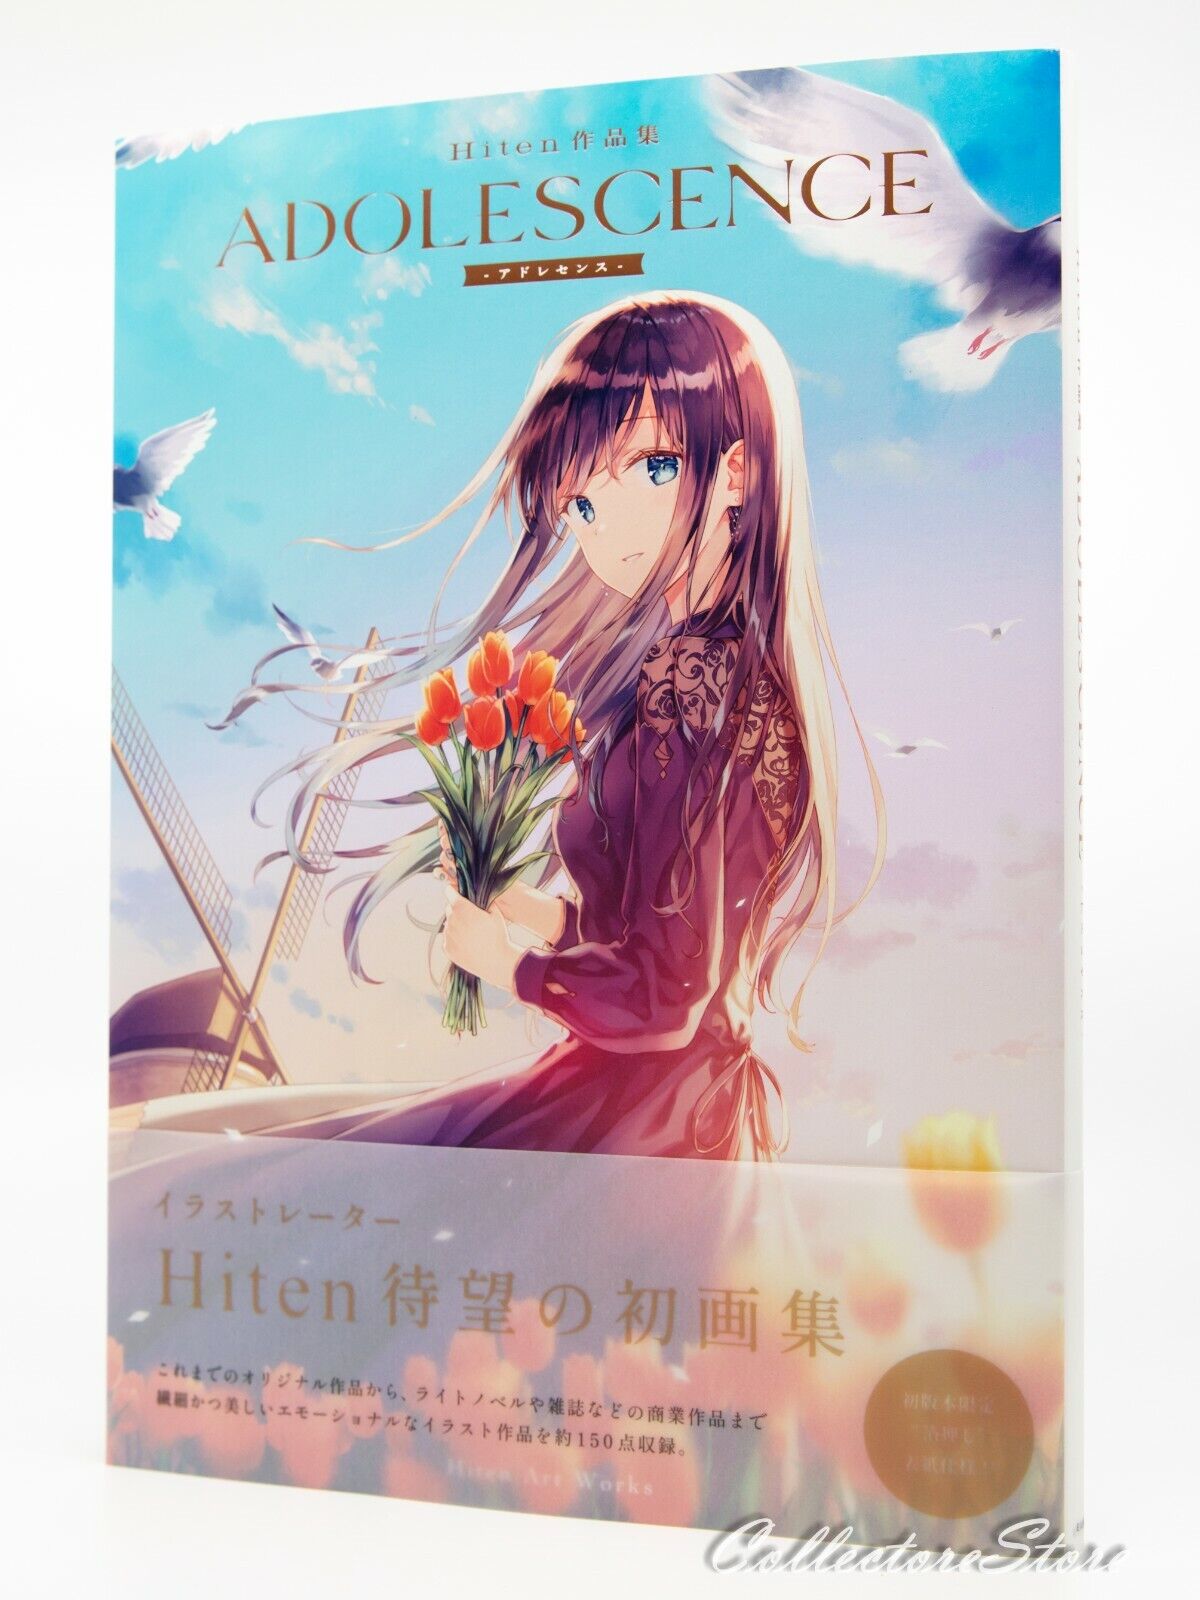 ADOLESCENCE Hiten Art Works (Revised Edition) (AIR/DHL)